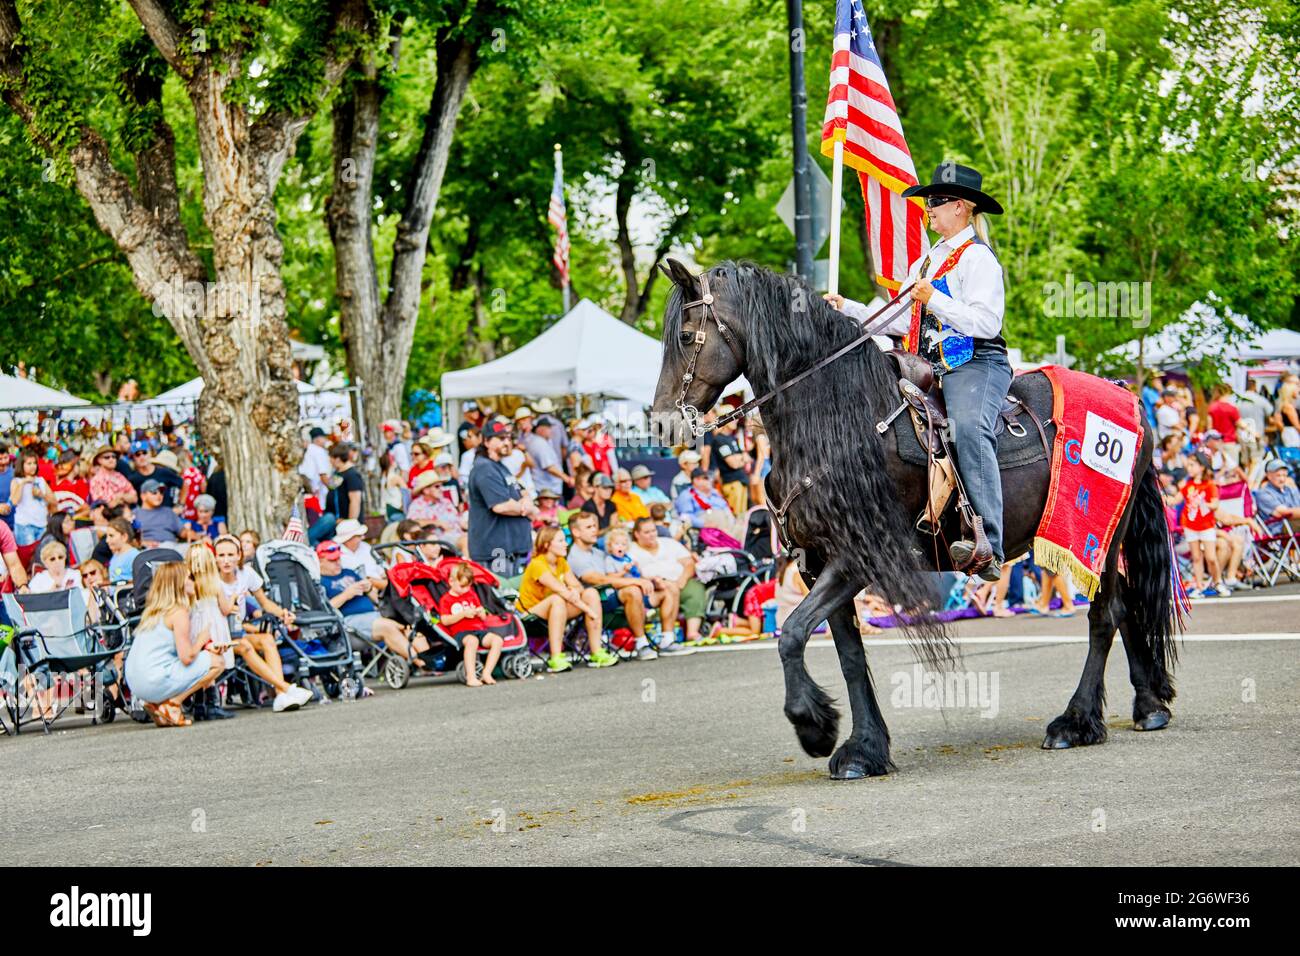 Prescott, Arizona, USA - July 3, 2021: Equestrian rider carrying an American flag while on horseback in the 4th of July parade Stock Photo